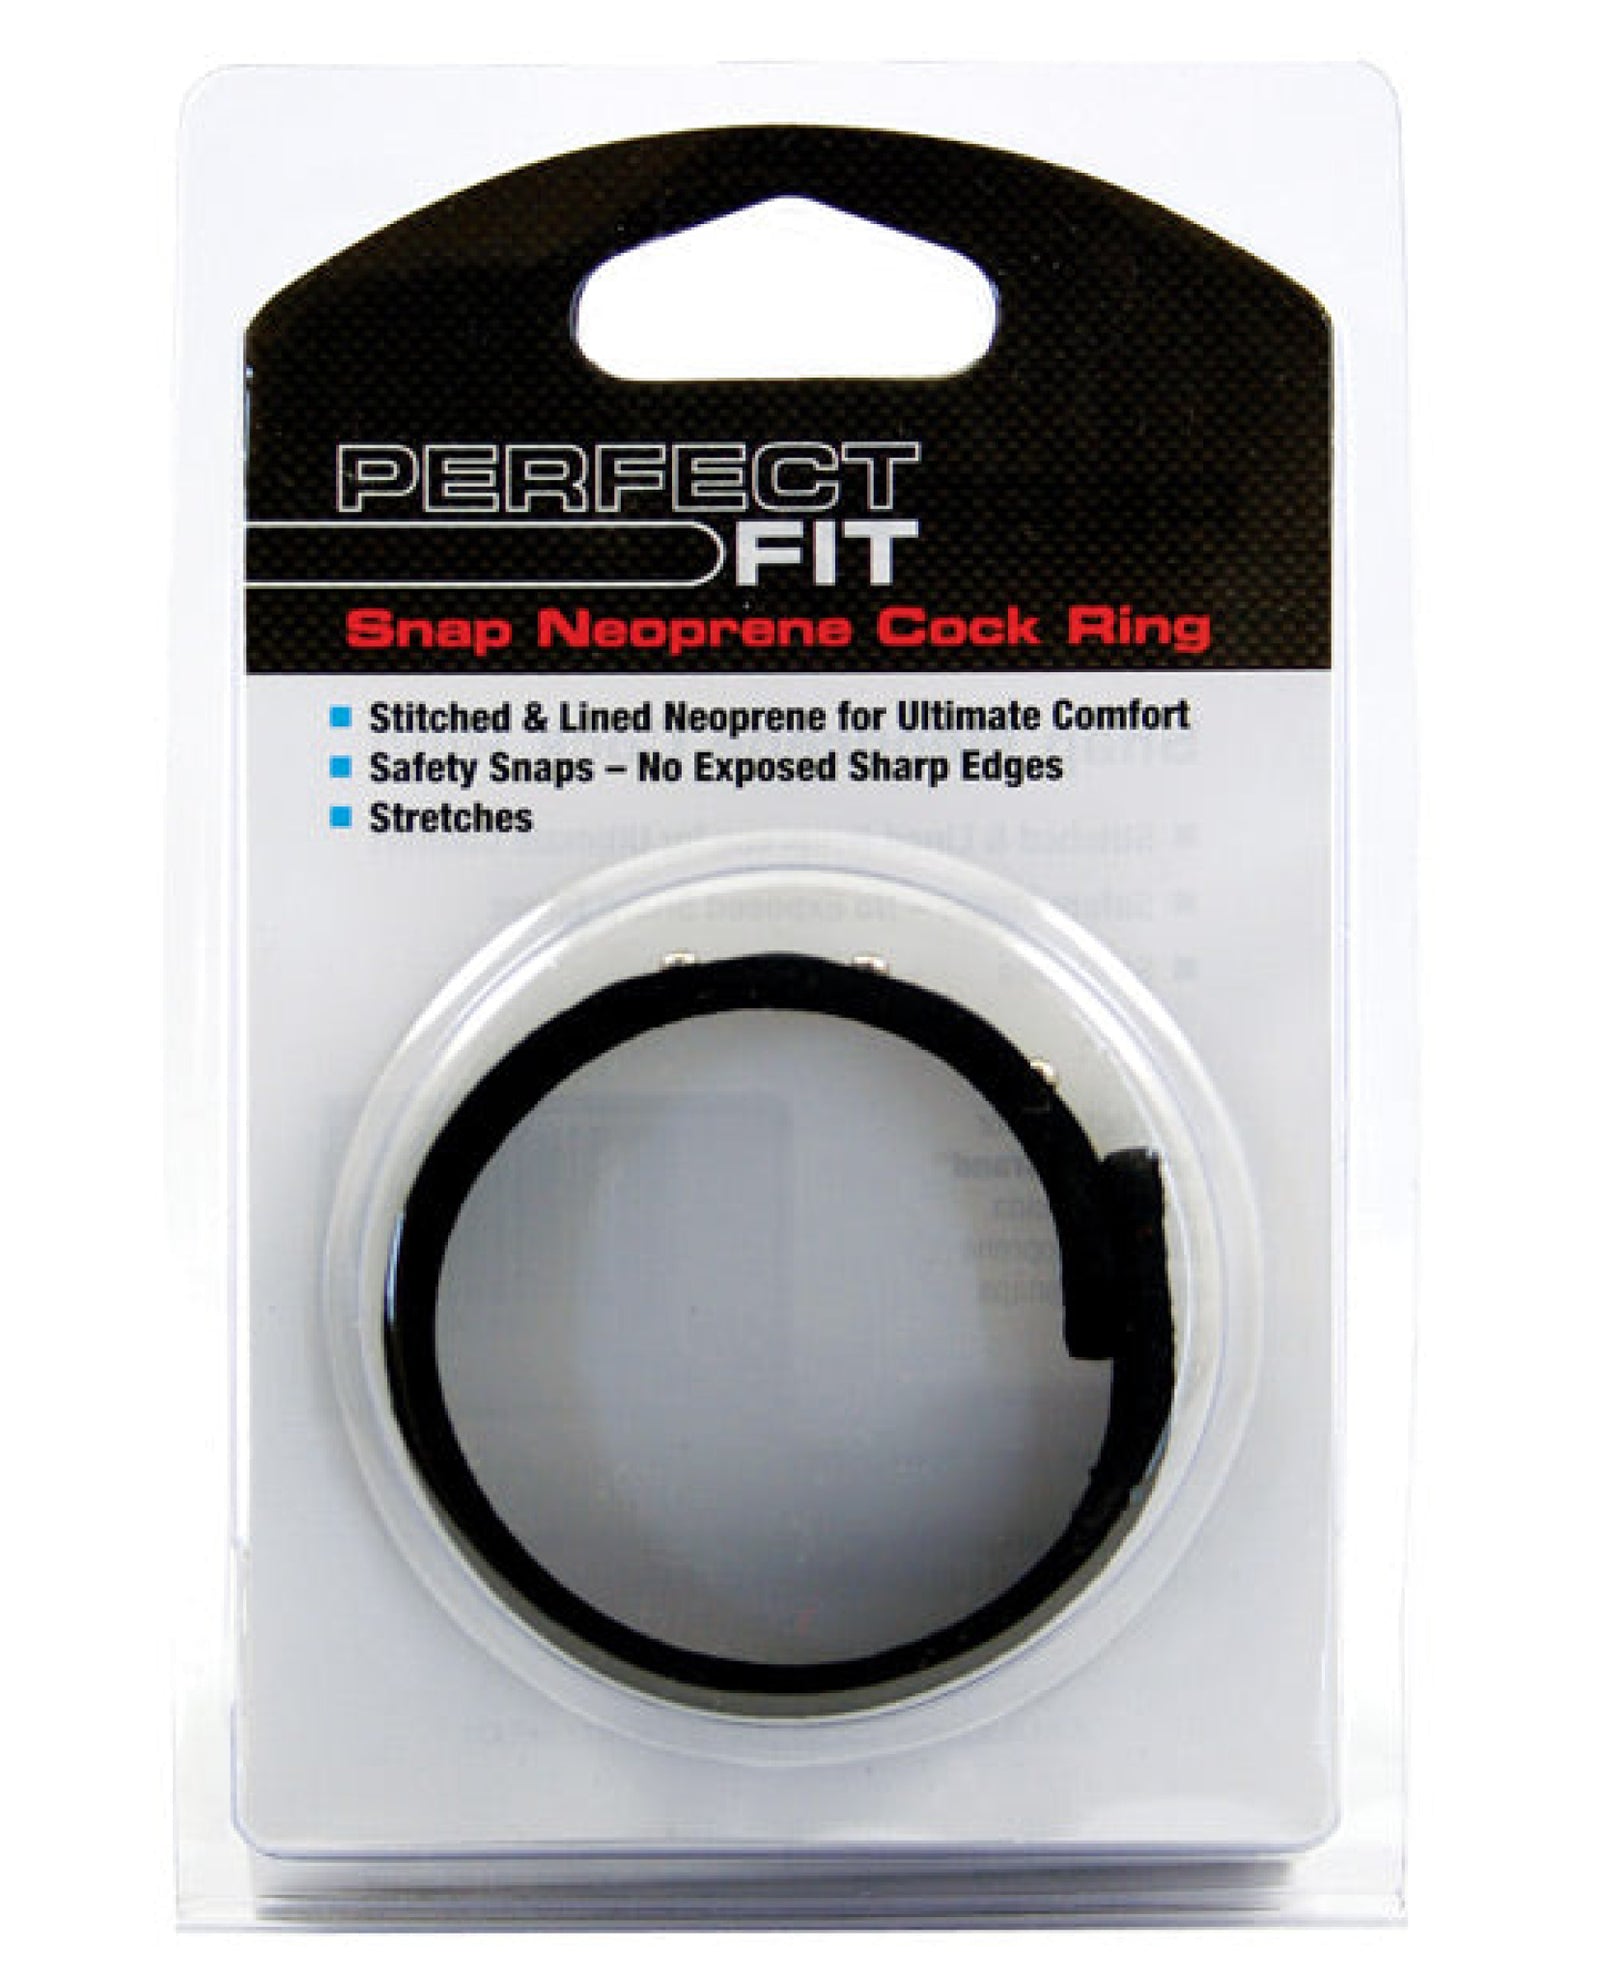 Perfect Fit Neoprene Snap Cock Ring - Black Perfect Fit